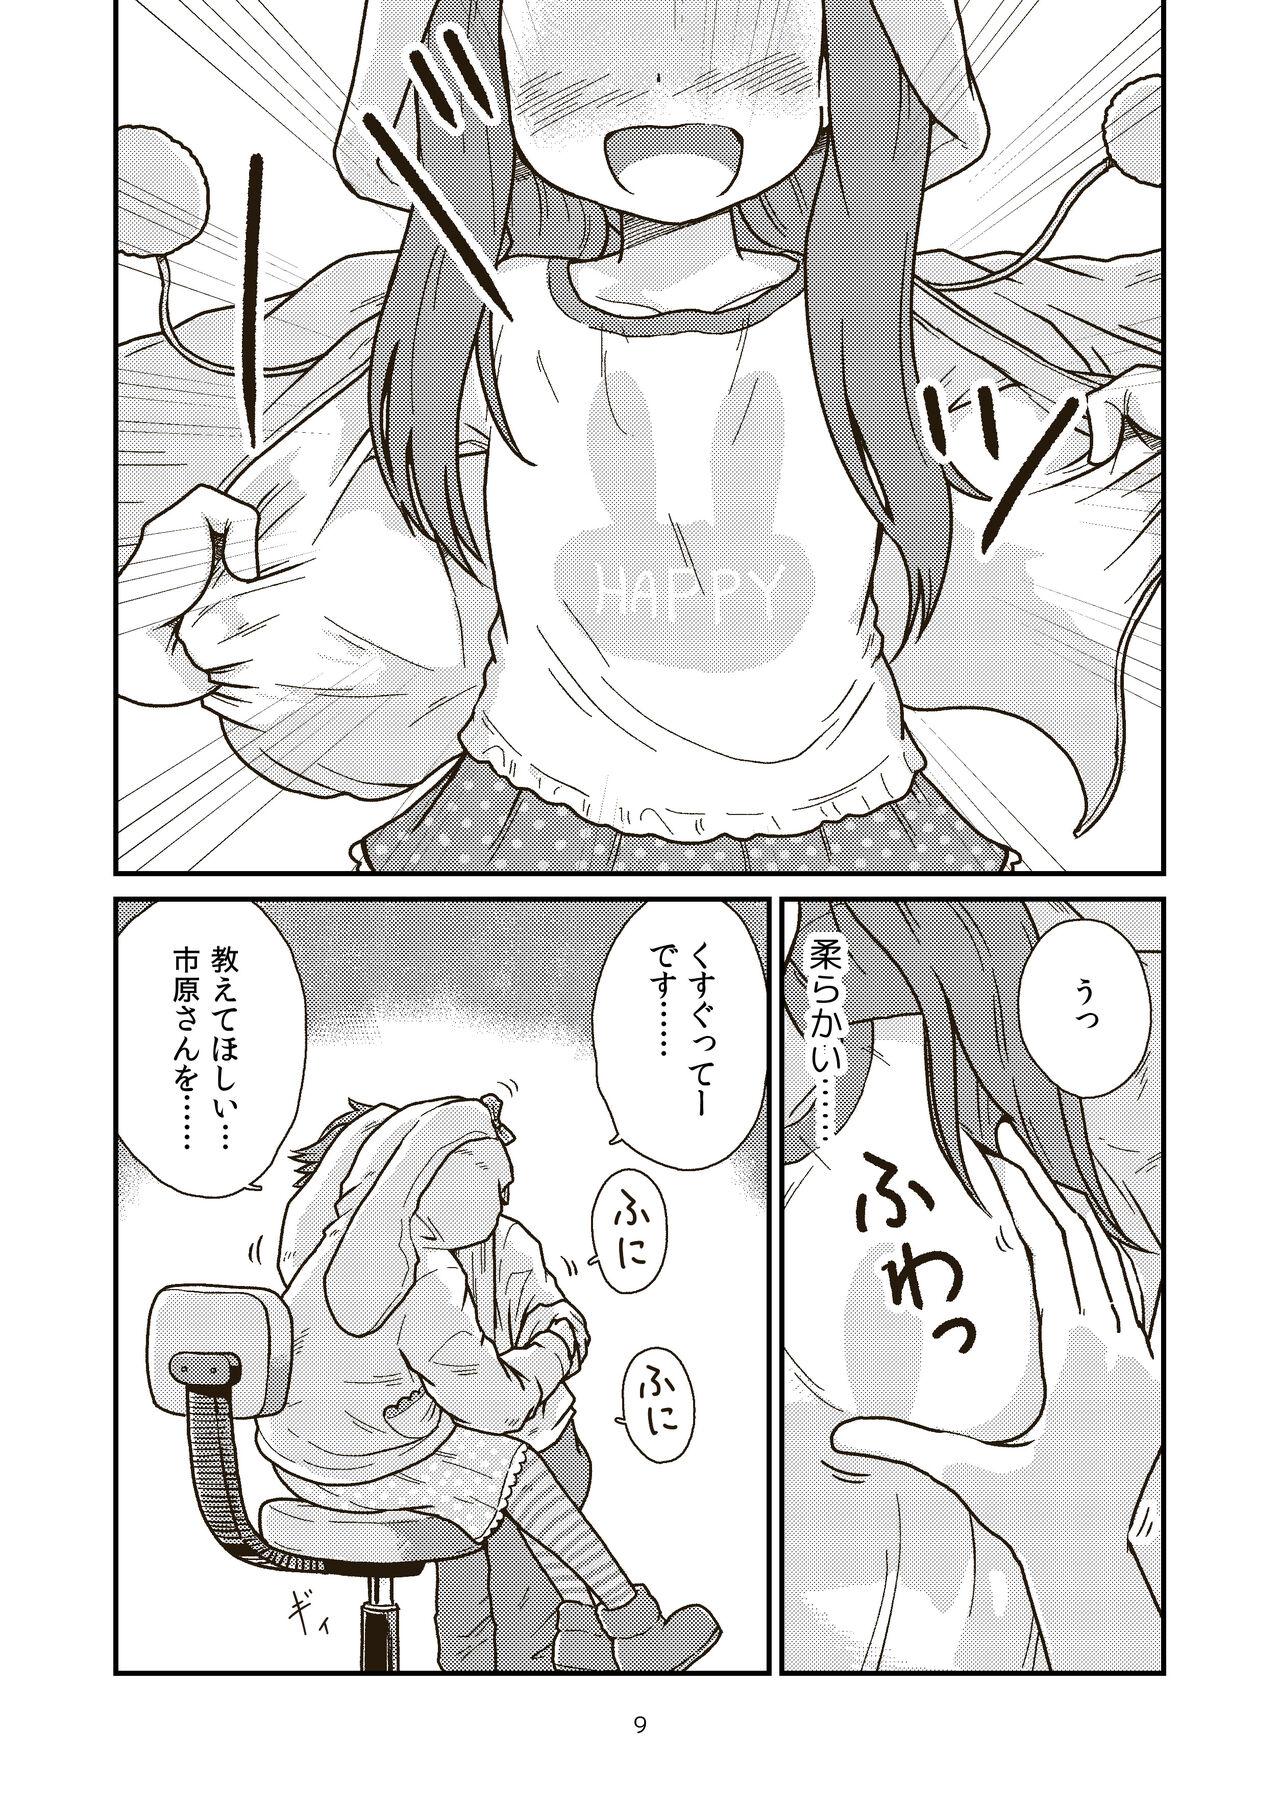 Belly The Last Day of Entertainment Section 3 - The idolmaster Reverse Cowgirl - Page 9